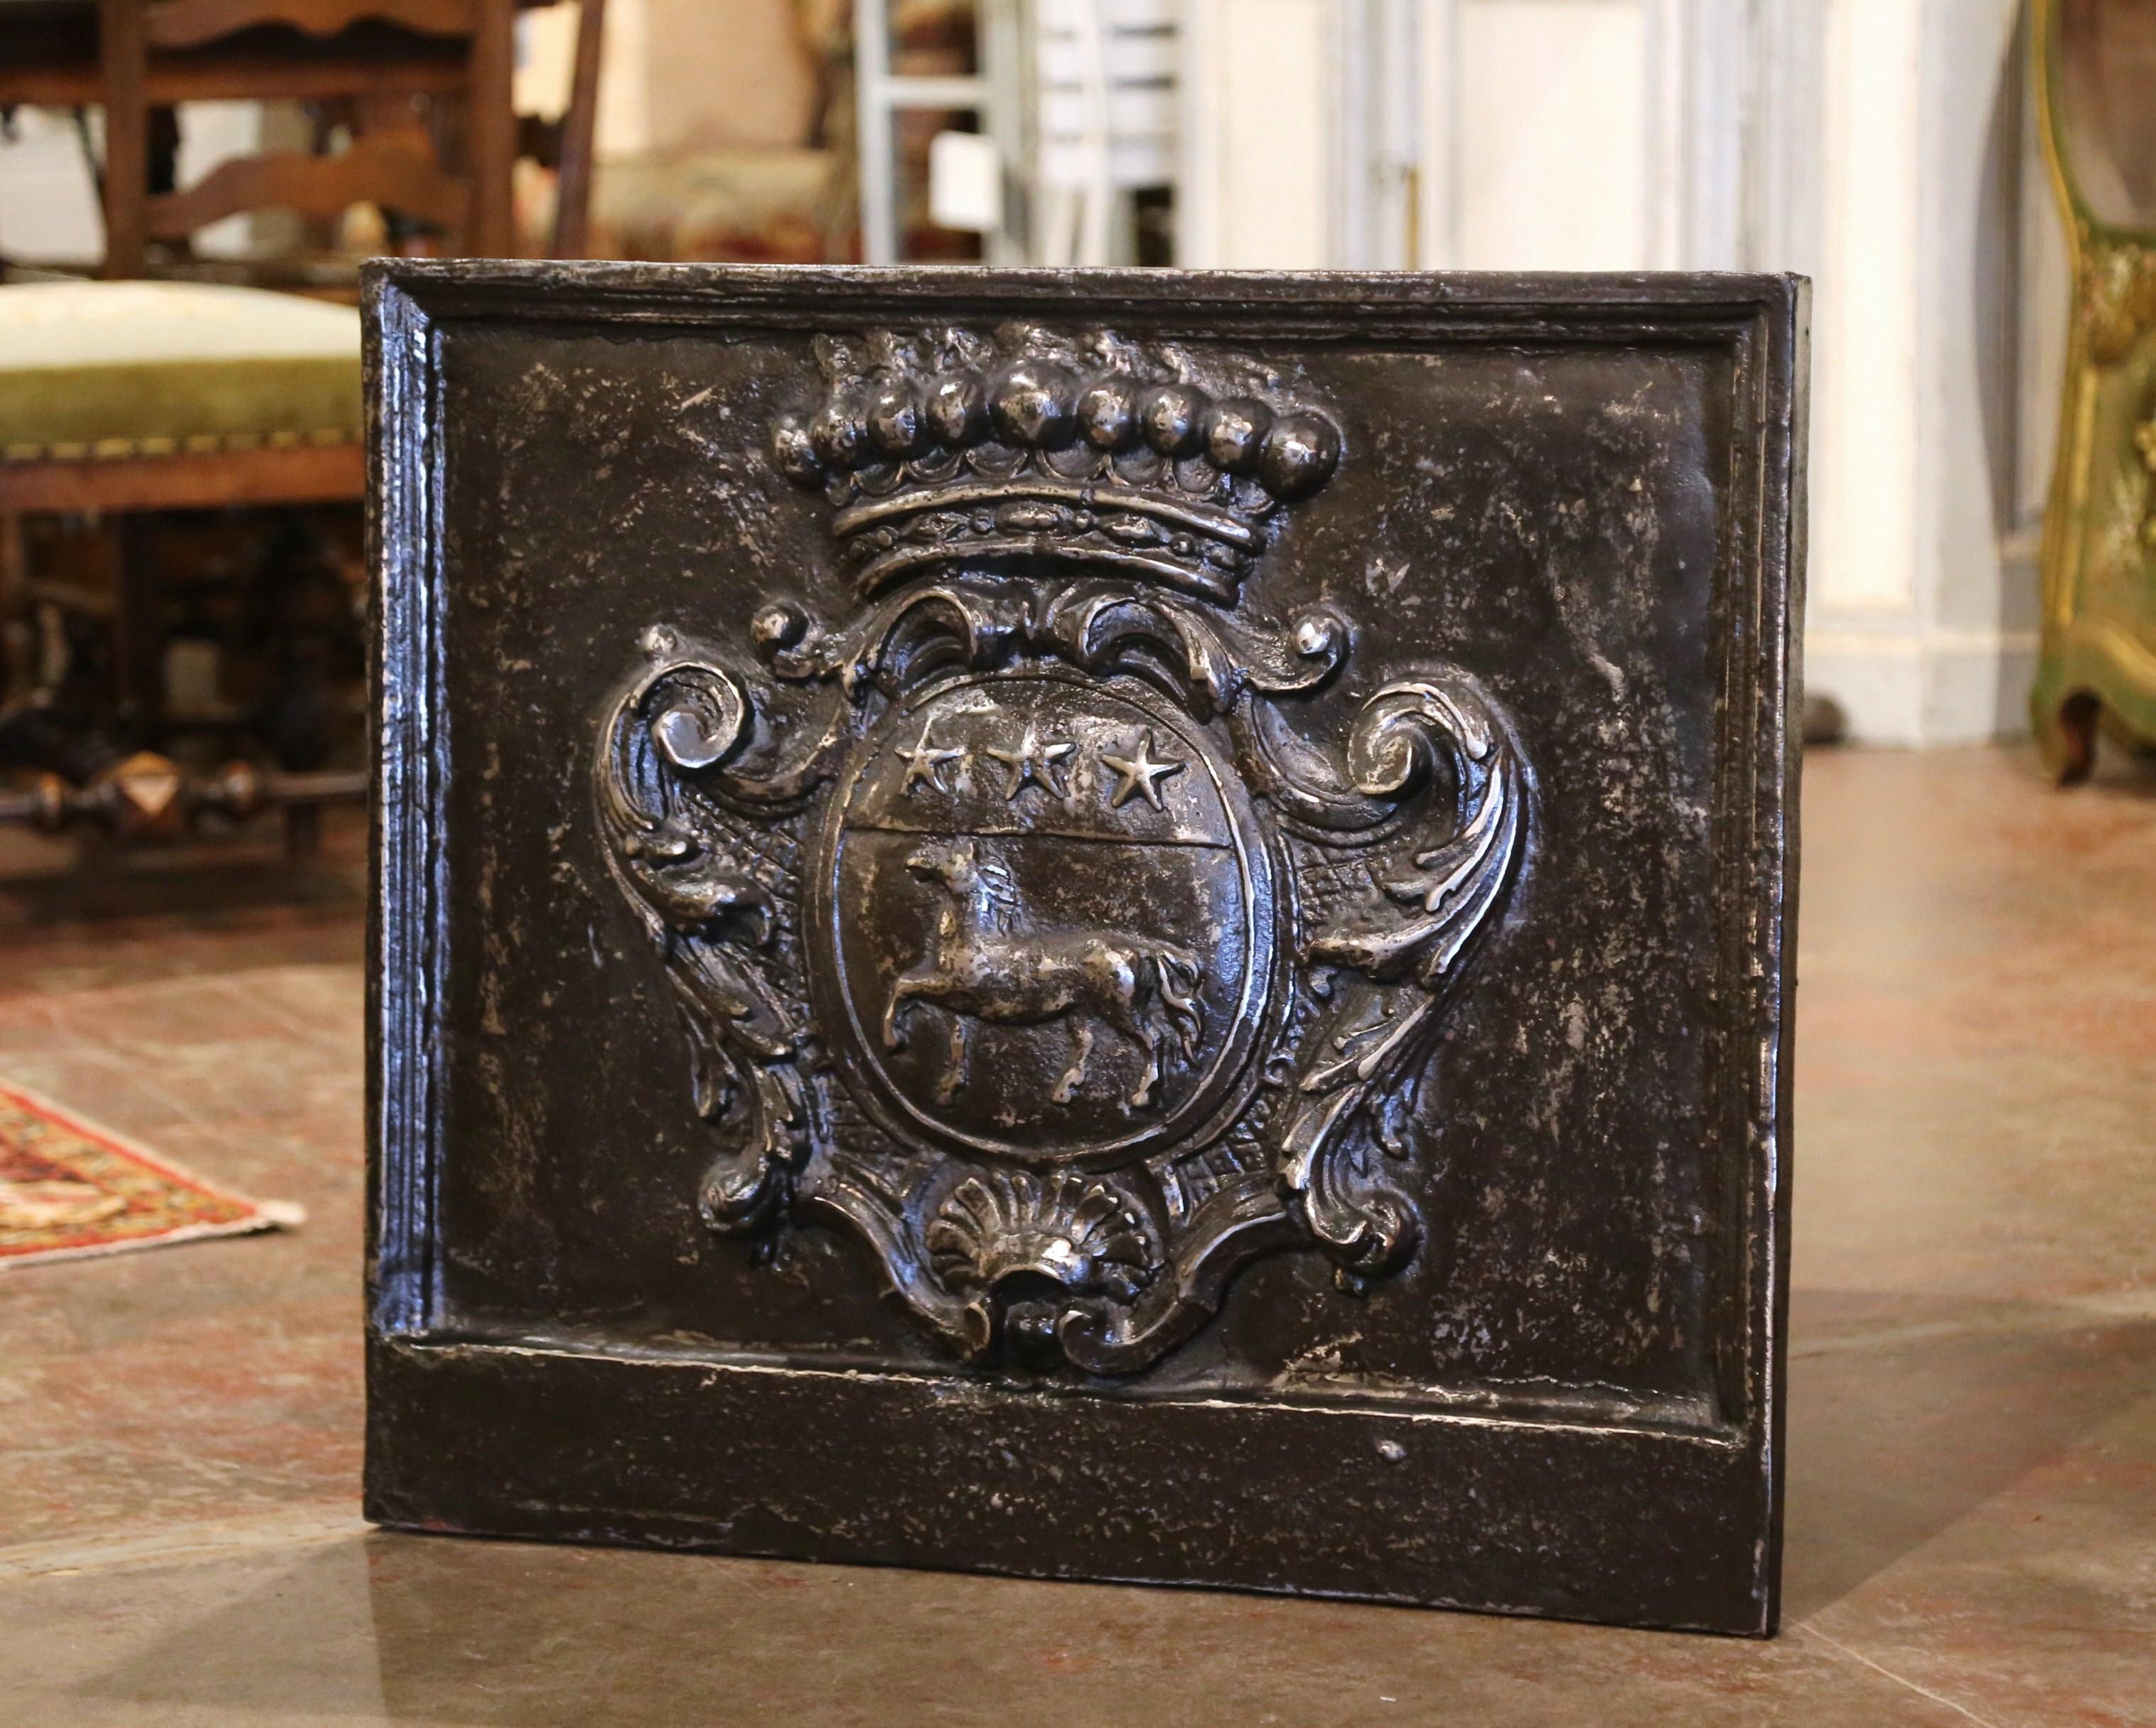 Decorate your fireplace with this elegant antique Regence Period fire back. Crafted circa 1720 and almost square in shape, the French ornate fireplace essential, features a family crest in very high relief, decorated with horse and star motifs and